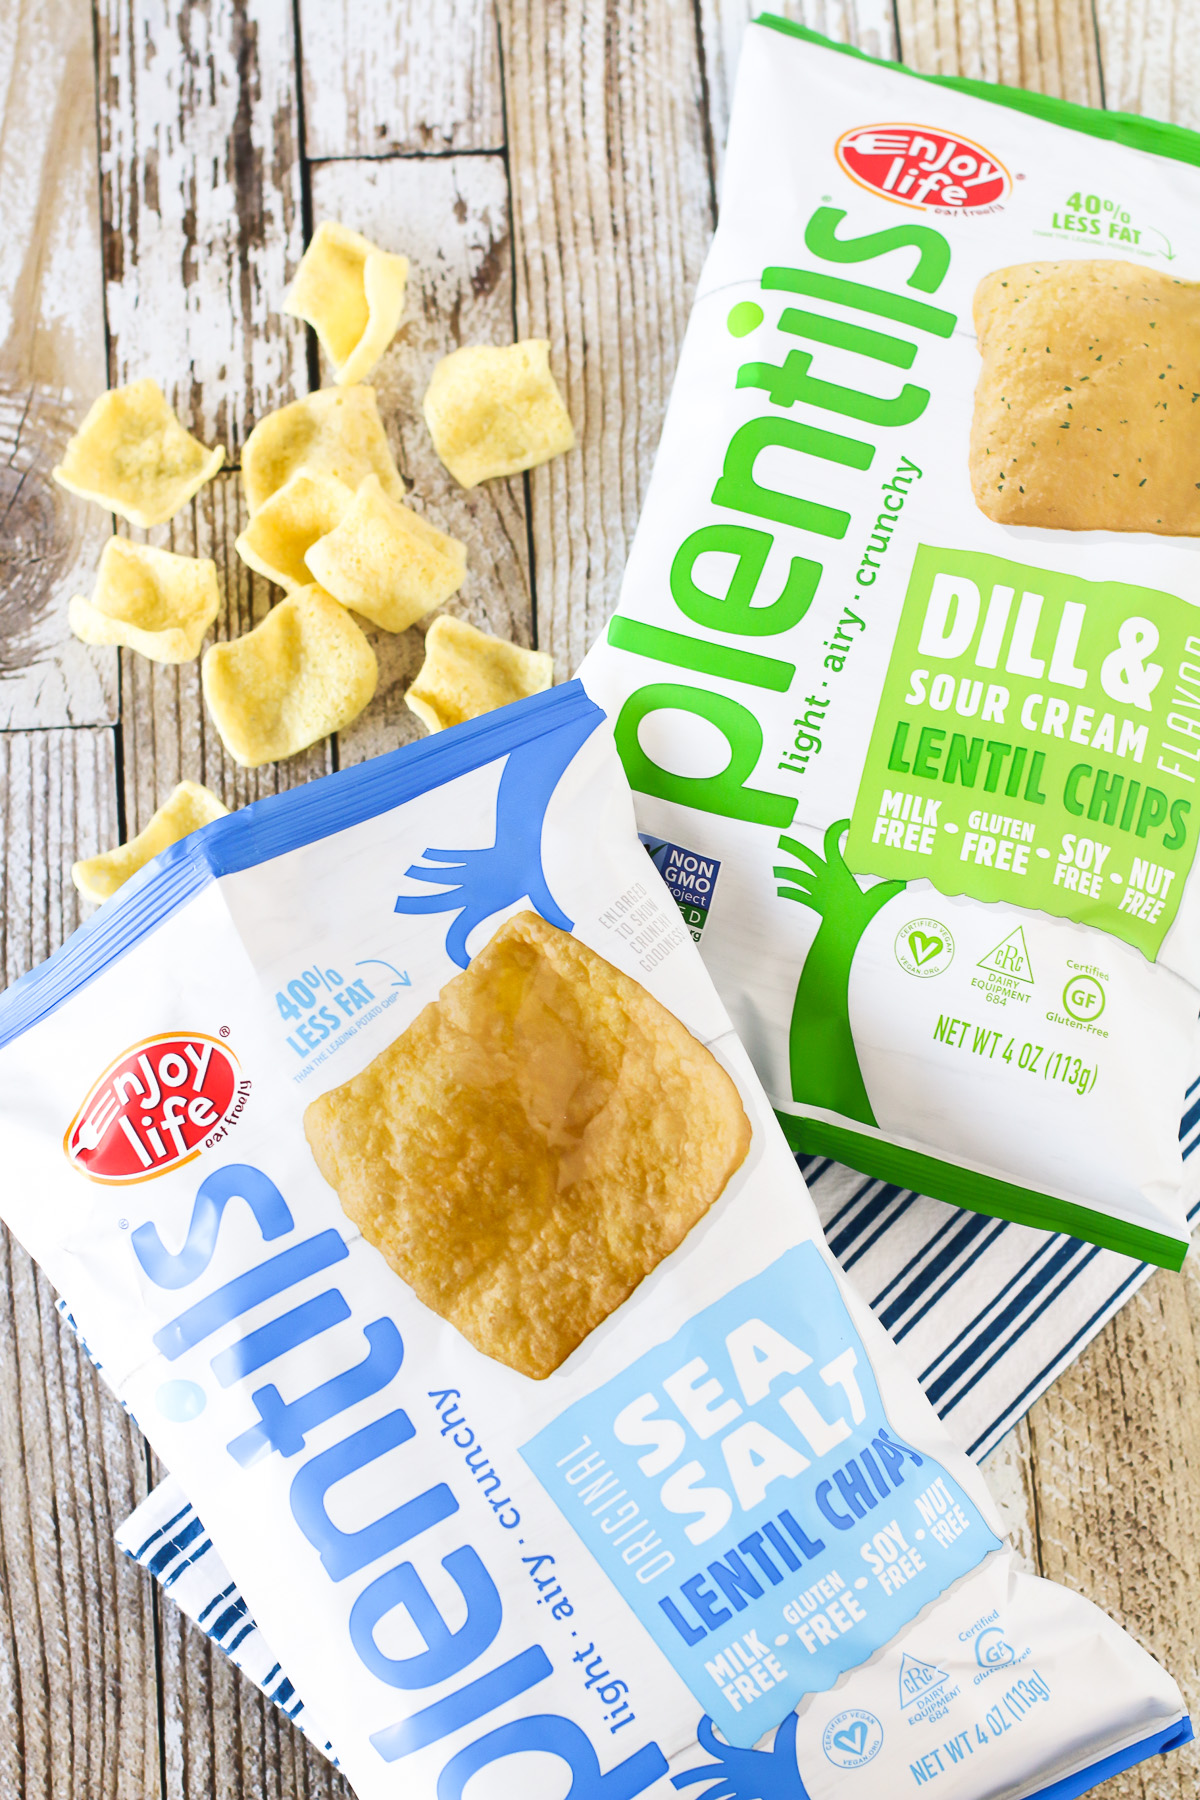 Enjoy Life Plentils. These allergen free lentil chips are crispy, salty and oh so addicting!